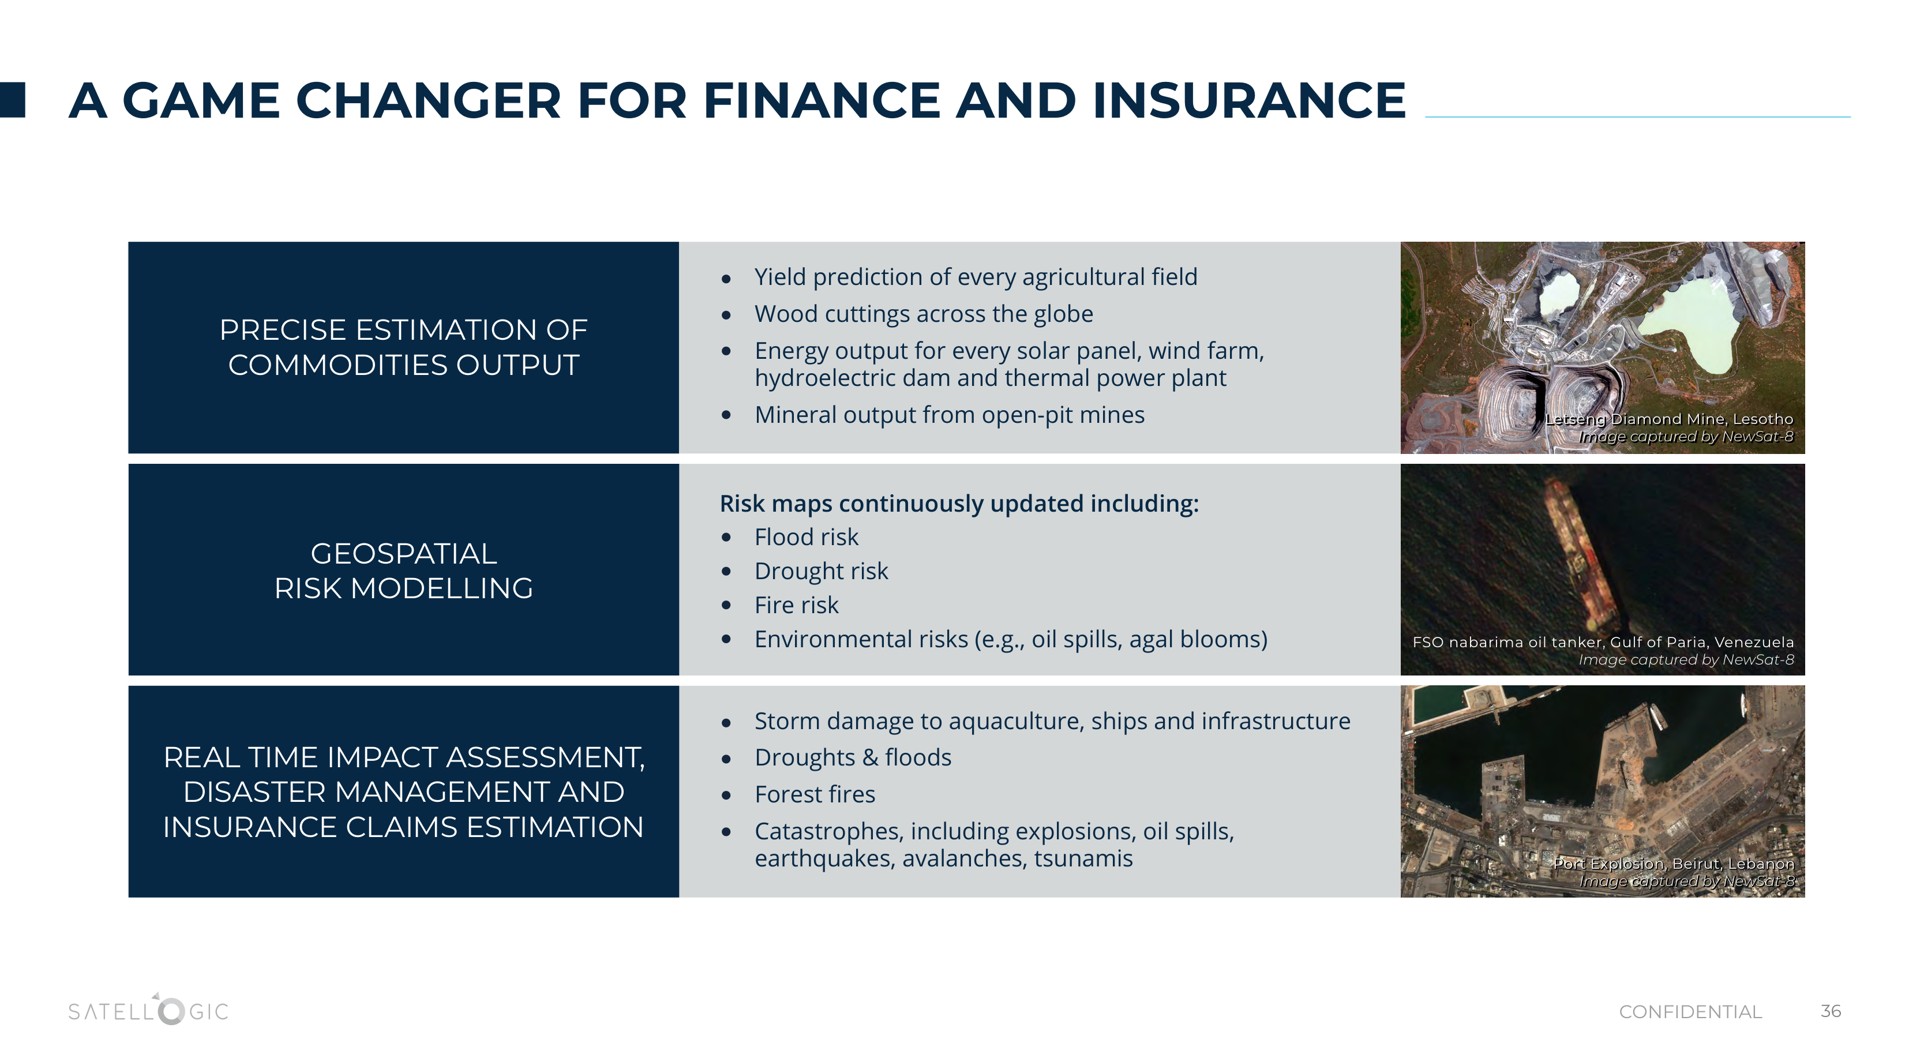 a game changer for finance and insurance | Satellogic